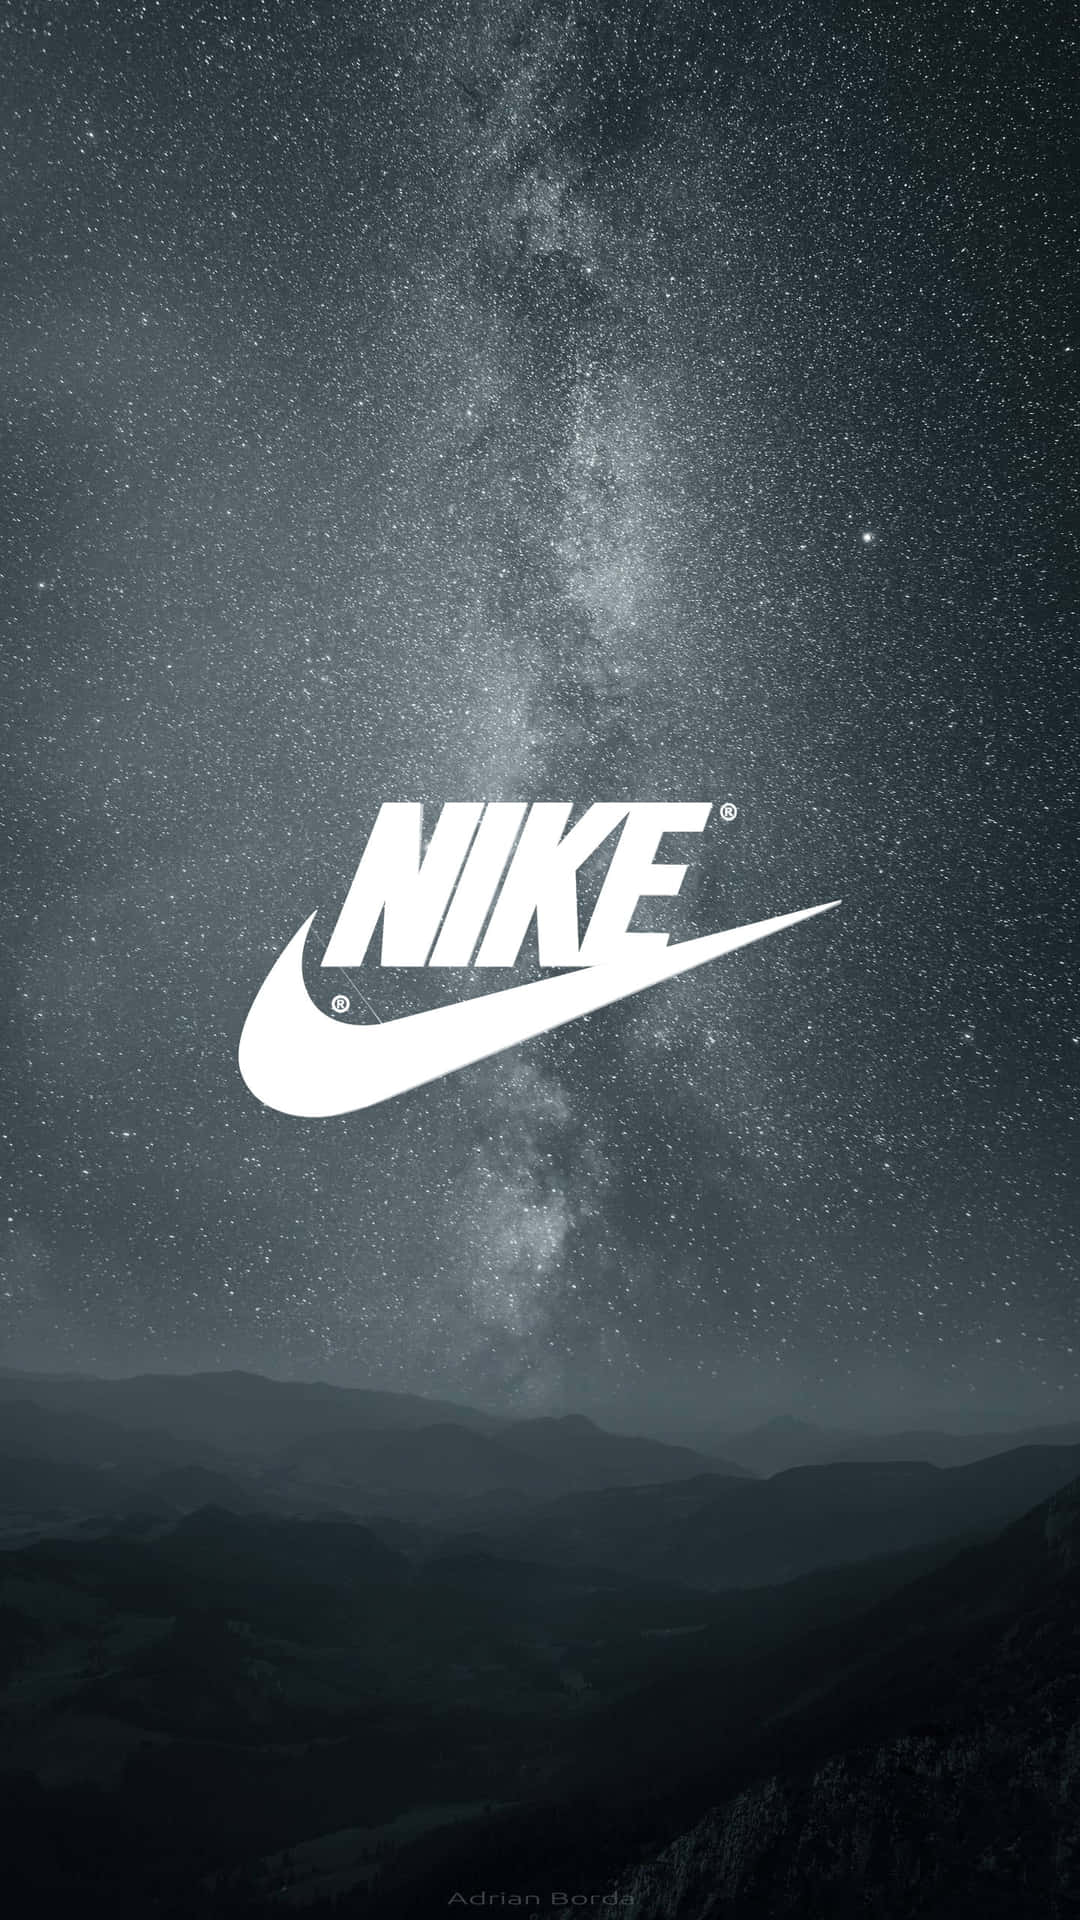 "Be part of the Nike Galaxy" Wallpaper